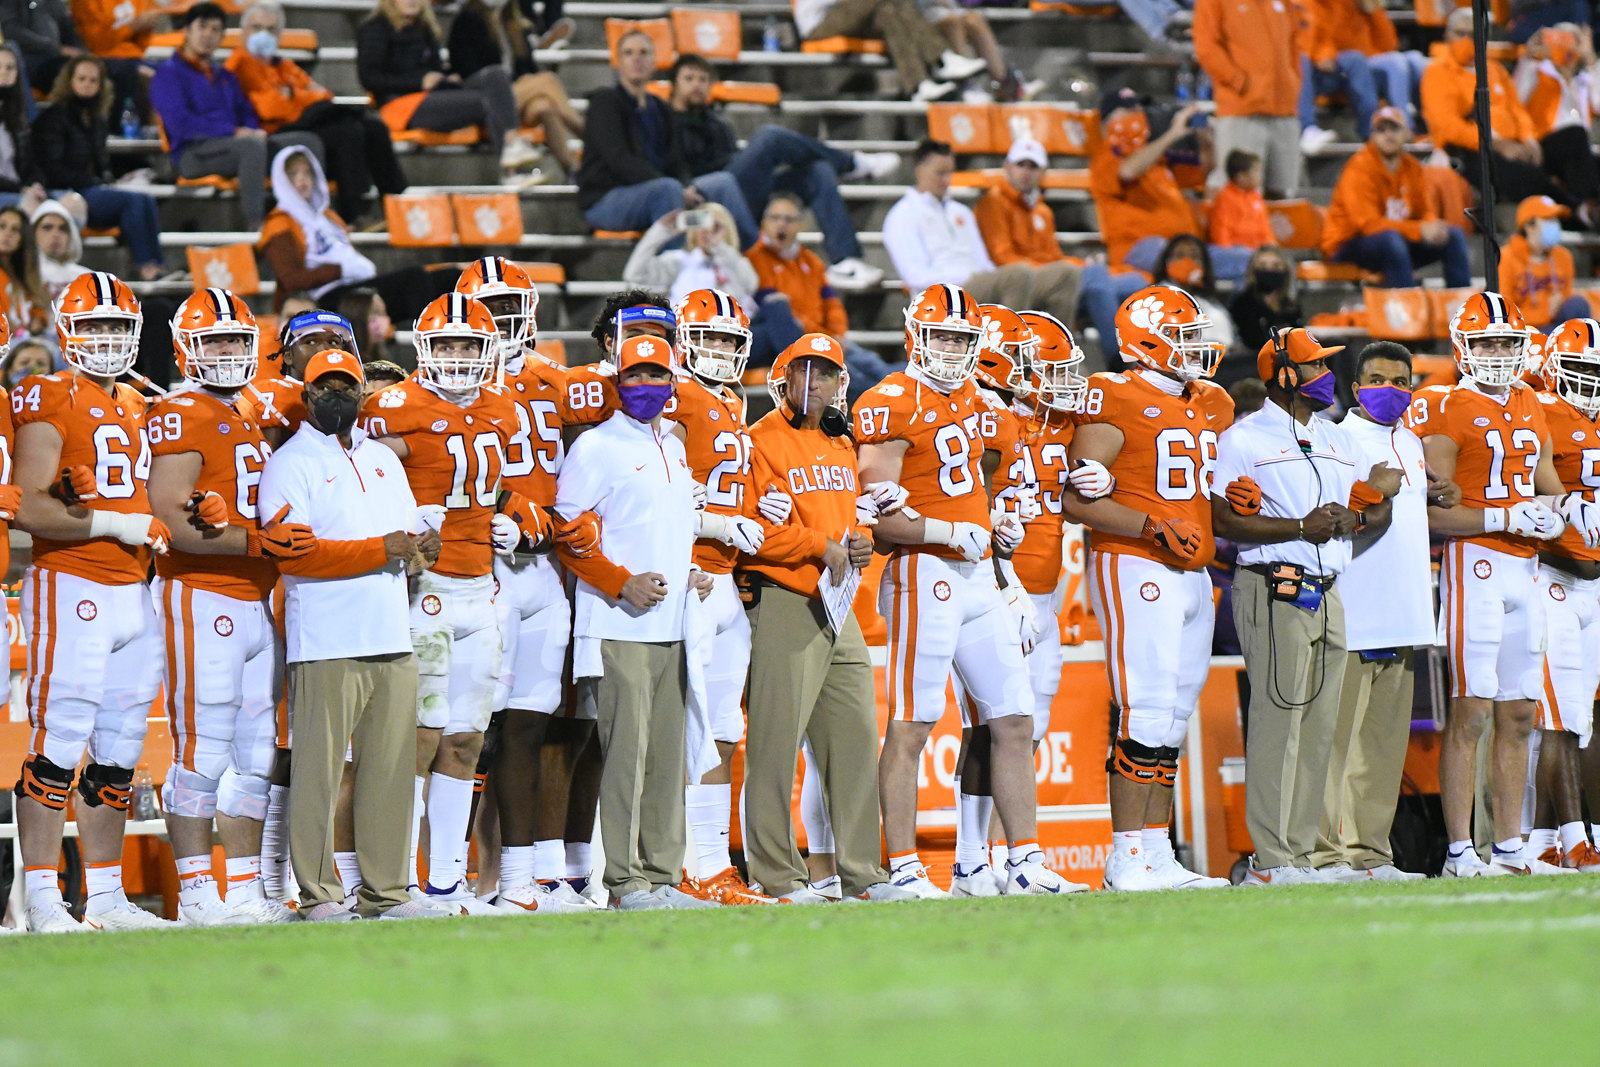 Clemson Tigers head coach, Dabo Swinney, locks arms with his team on the sideline before the start of the second quarter in the game between the Clemson Tigers and the Virginia Cavaliers on October 03, 2020.